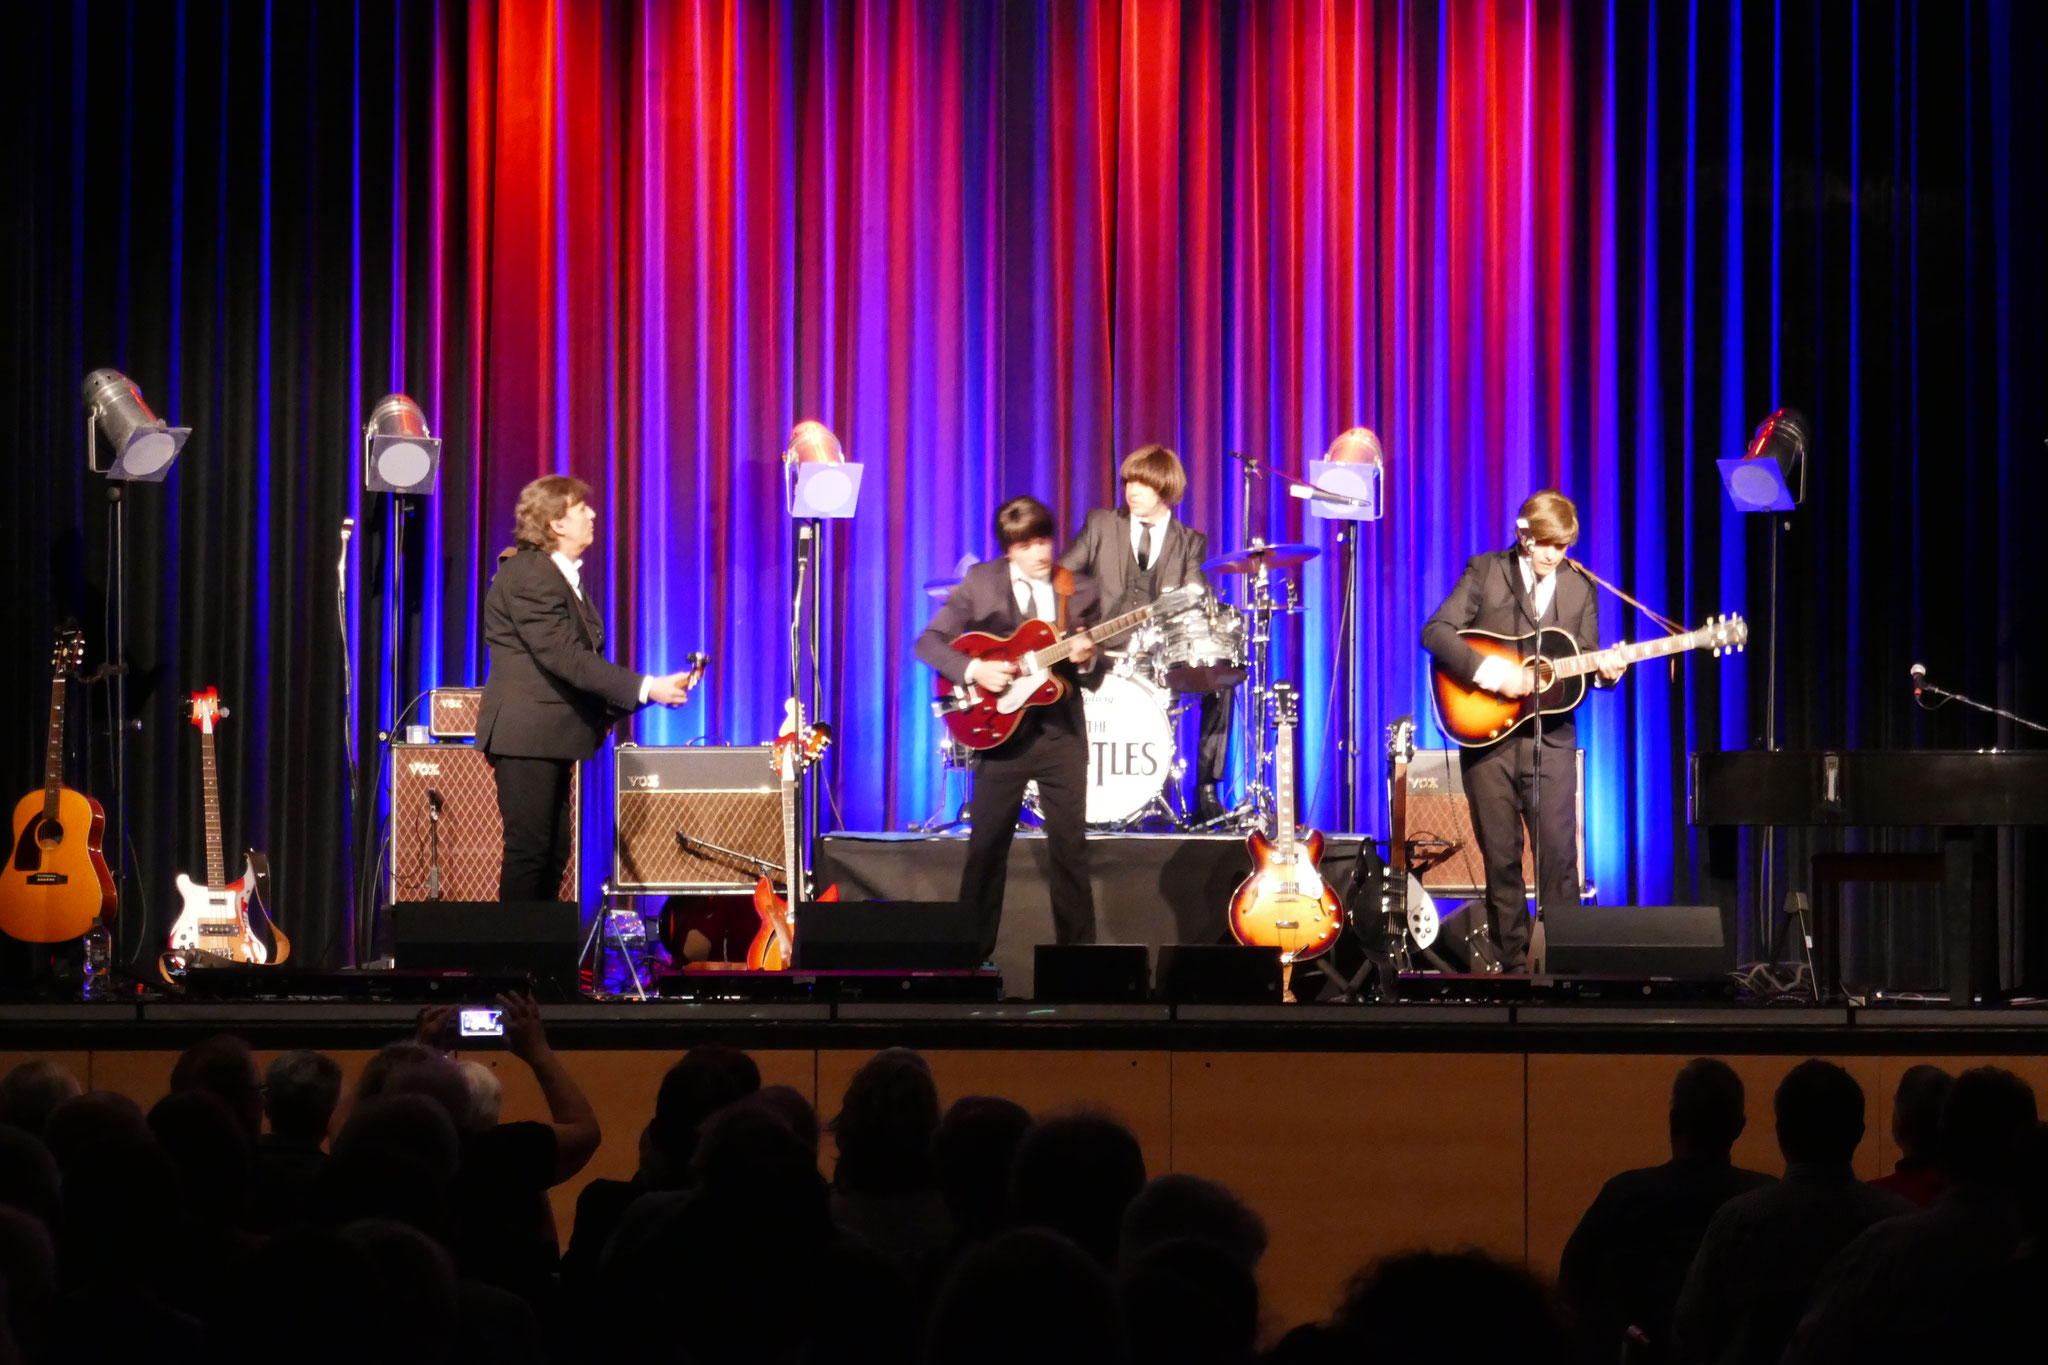 Beatles Coverband on Tour